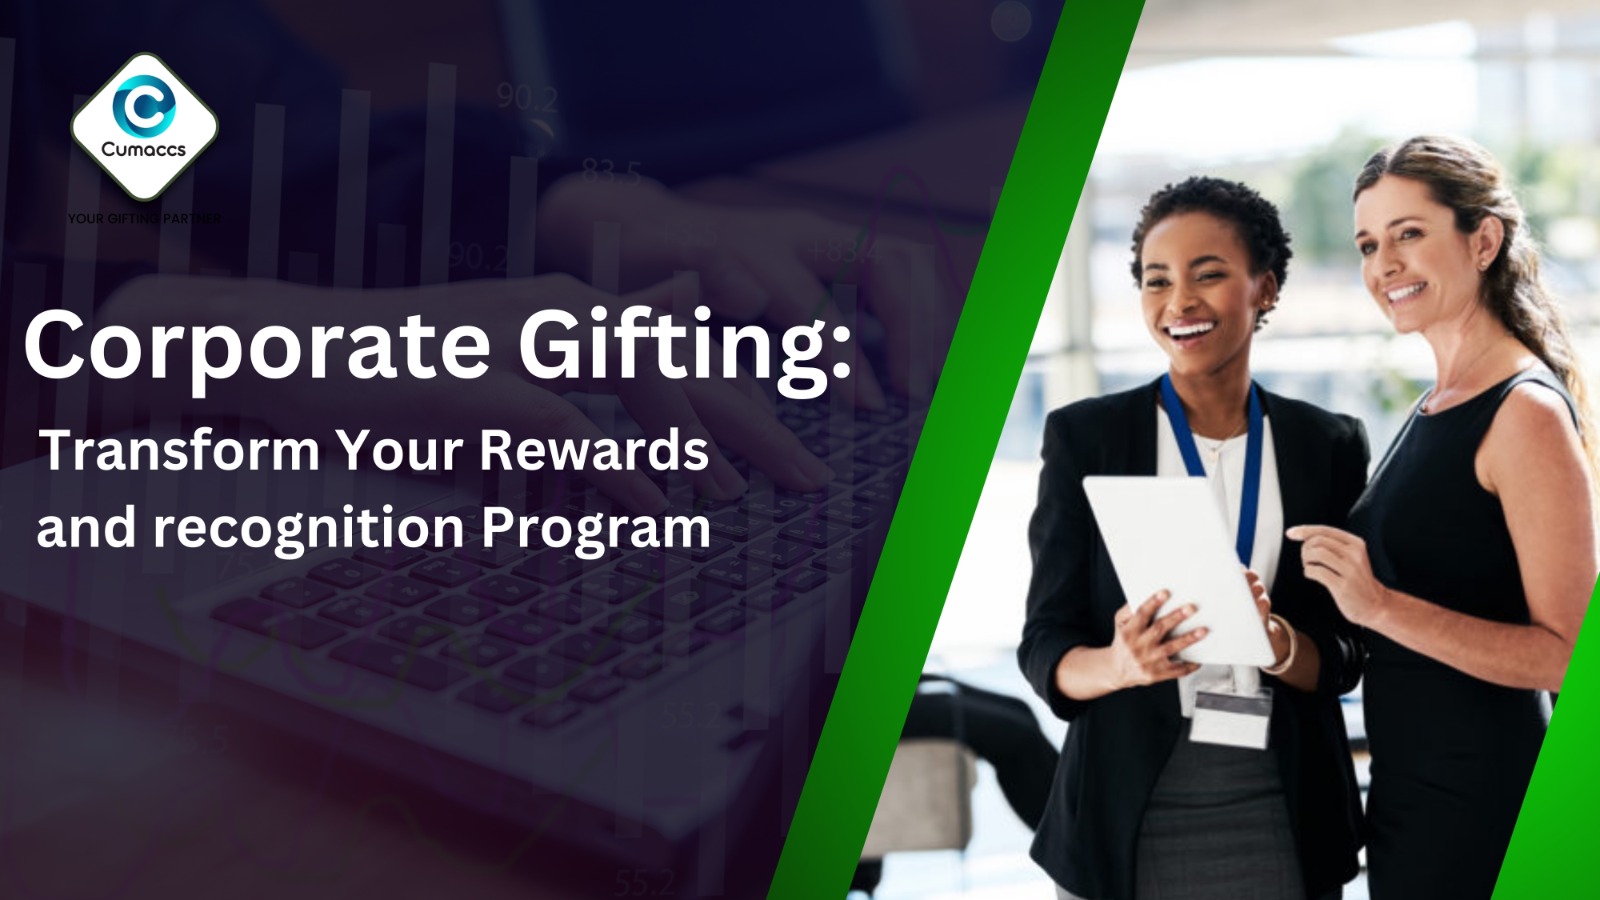 Corporate Gifting: Transform Your Rewards and Recognition Program